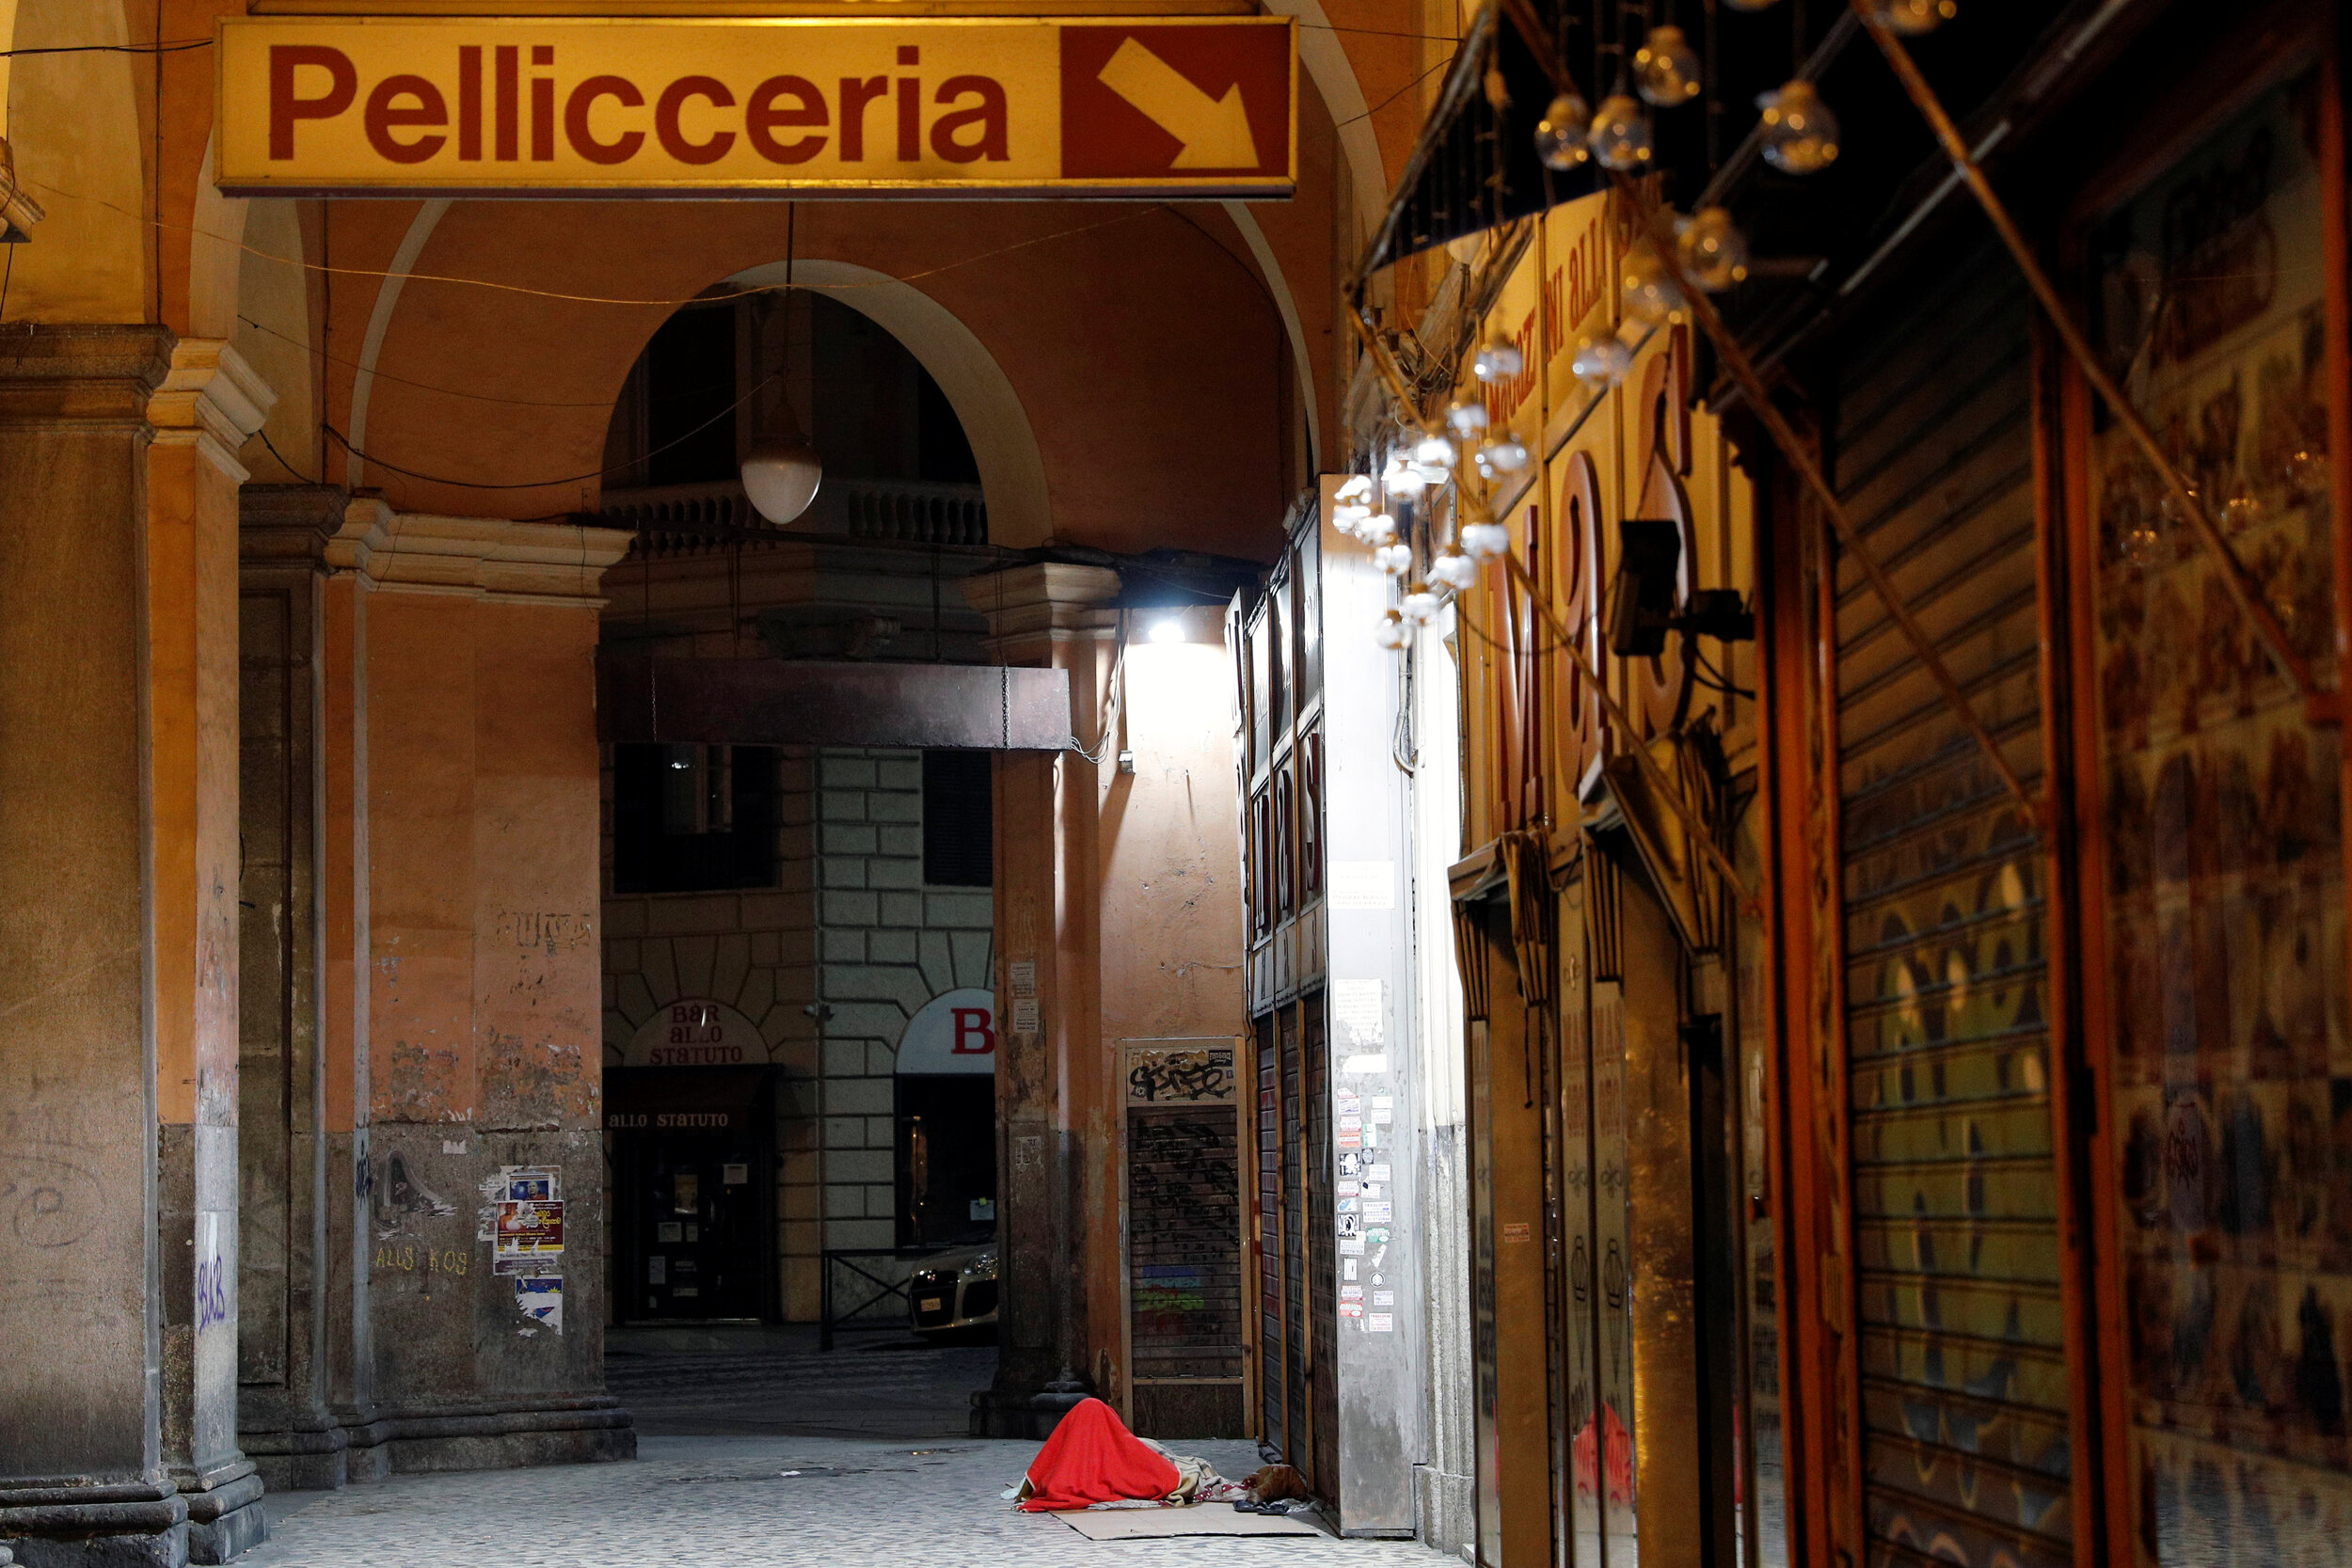  A homeless person sleeps on a street in Rome, Italy, March 17, 2020. Since the coronavirus crisis, Red Cross workers have been increasing their daily activities to meet the growing needs of the homeless in Rome. 